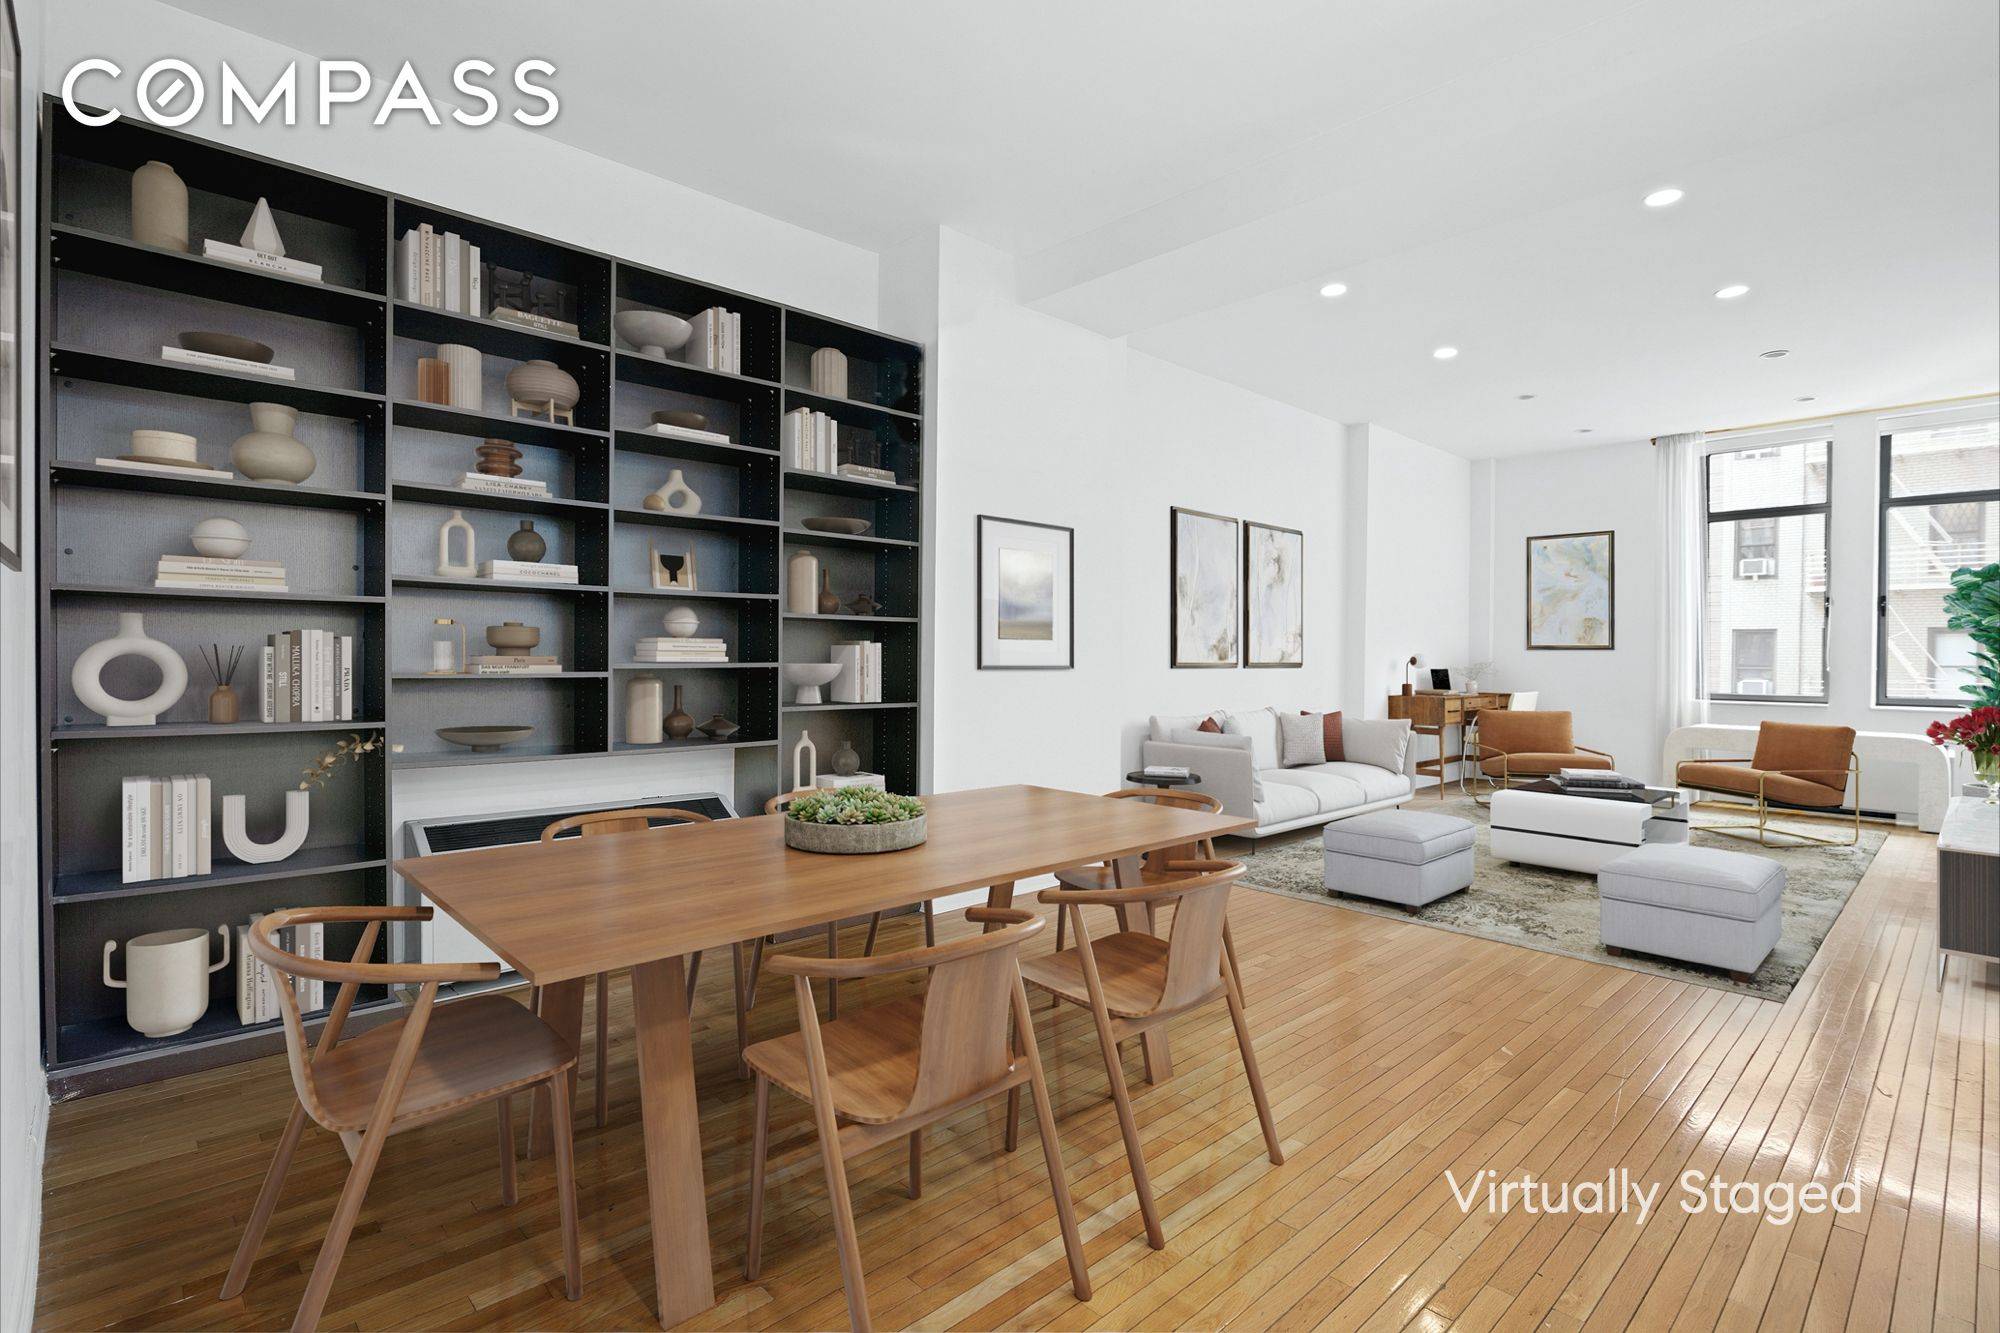 Renovated 3 BD Loft with Soaring 11 ft Ceilings Inside Amenity Filled Luxury Chelsea Condo The pin drop quiet home is located at the end of the hall for ultimate ...